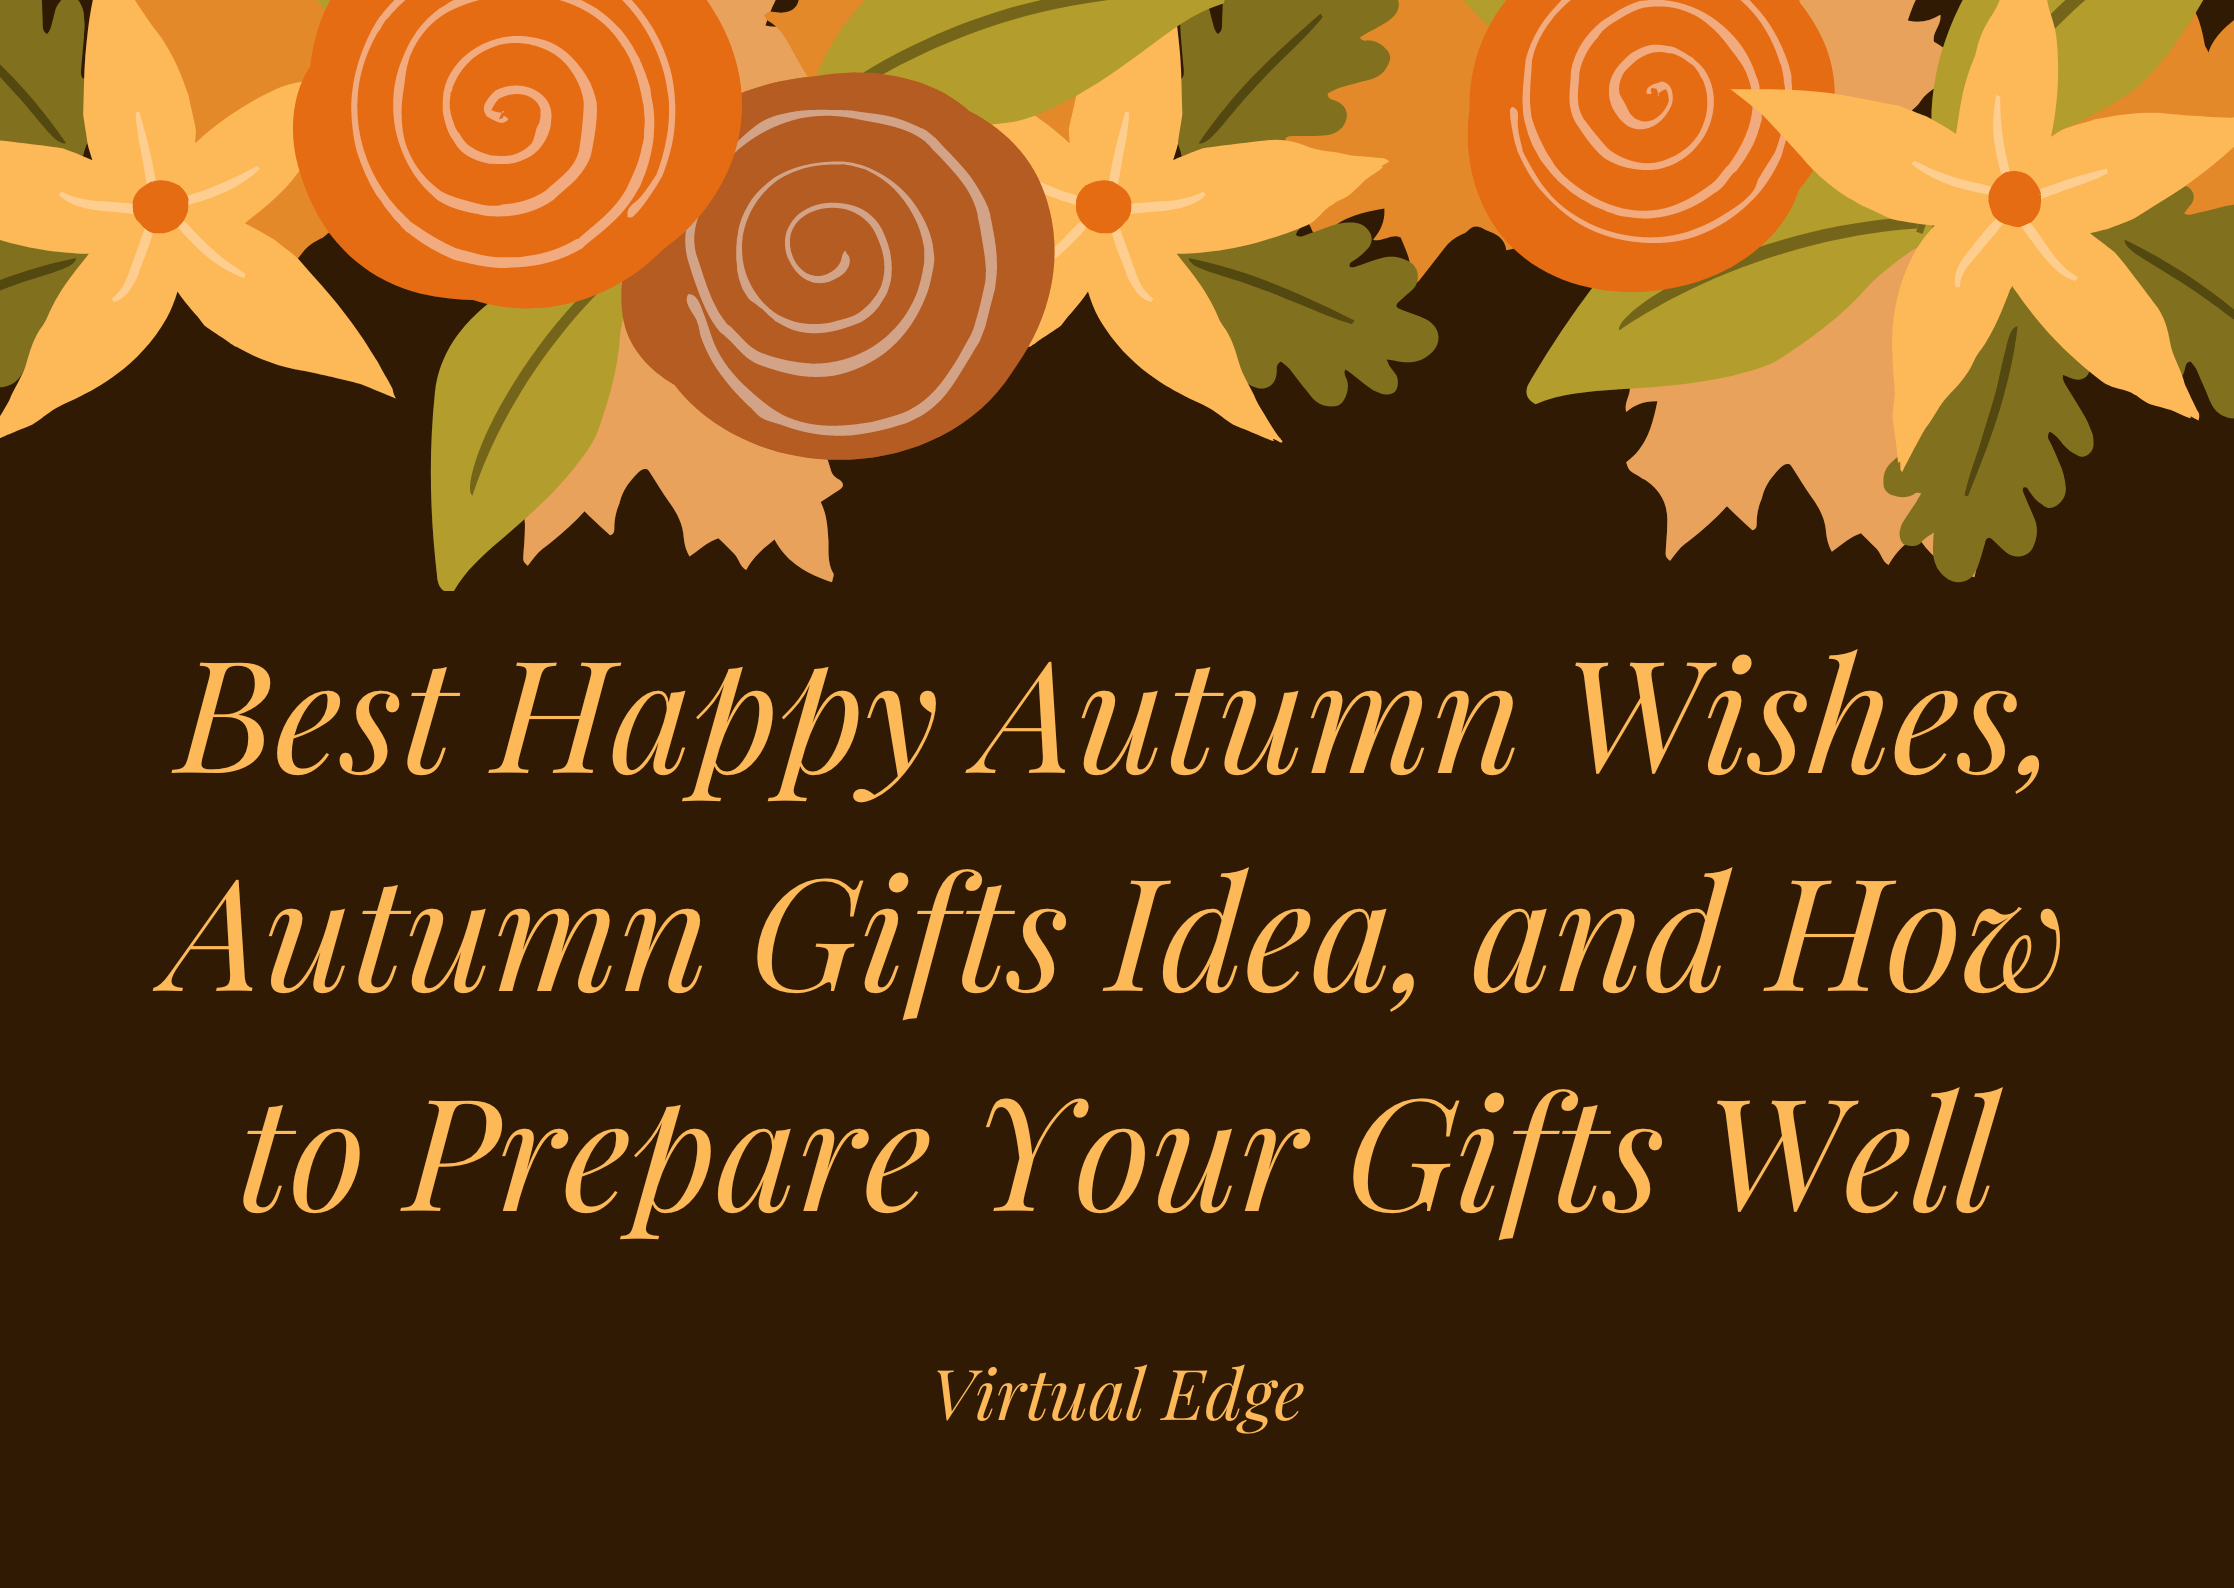 Best Happy Autumn Wishes, Autumn Gifts Idea, and How to Prepare Your Gifts Well